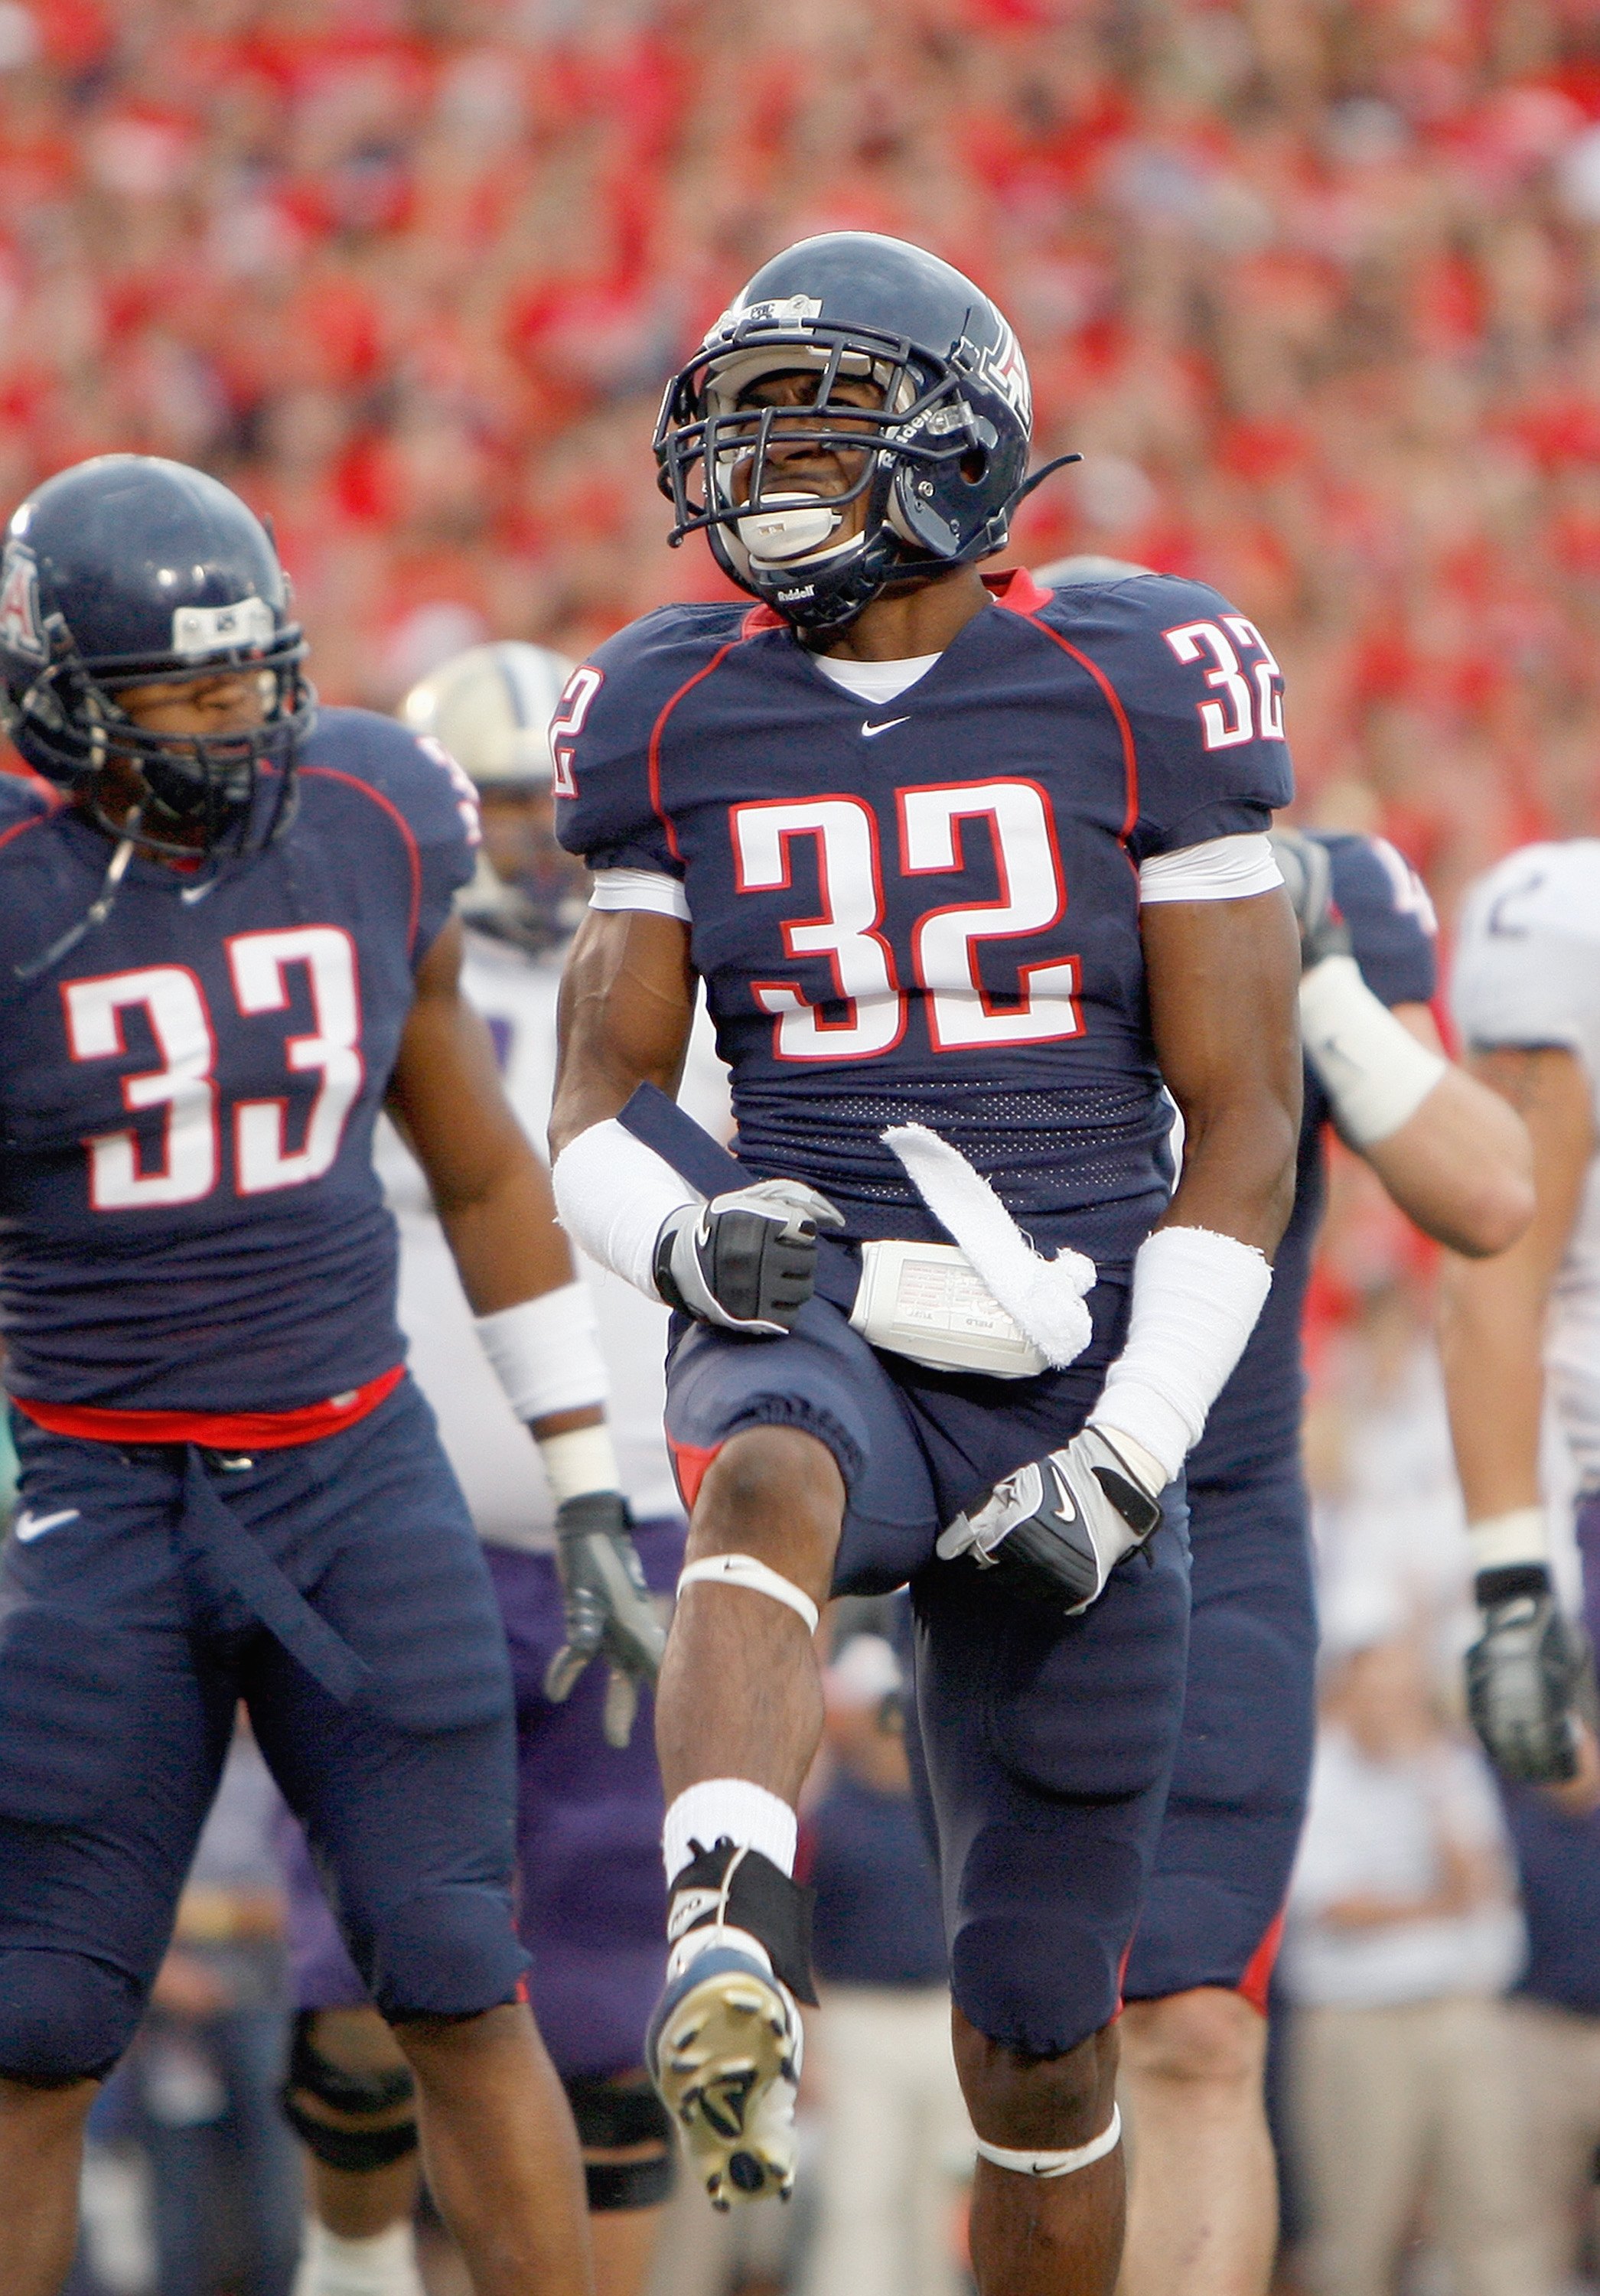 TUSCON - OCTOBER 4:  Nate Ness #32 of the Arizona Wildcats reacts on the field during the game against the Washington Huskies on October 4, 2008 at Arizona Stadium in Tucson, Arizona. (Photo by: Gregory Shamus/Getty Images)